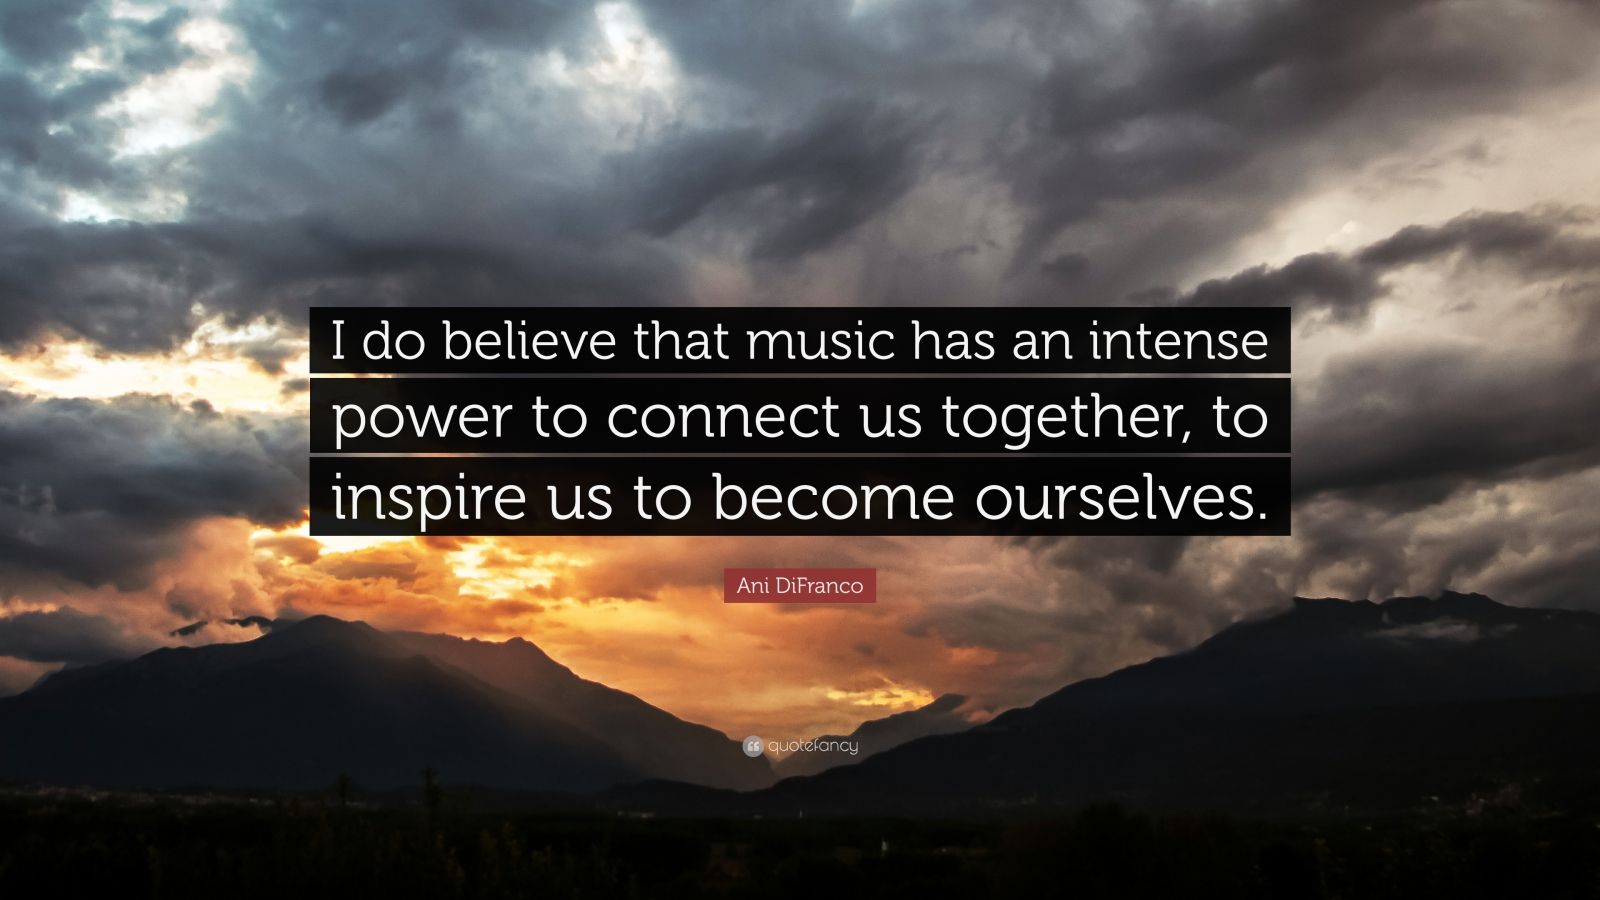 Ani DiFranco Quote: "I do believe that music has an intense power to connect us together, to ...